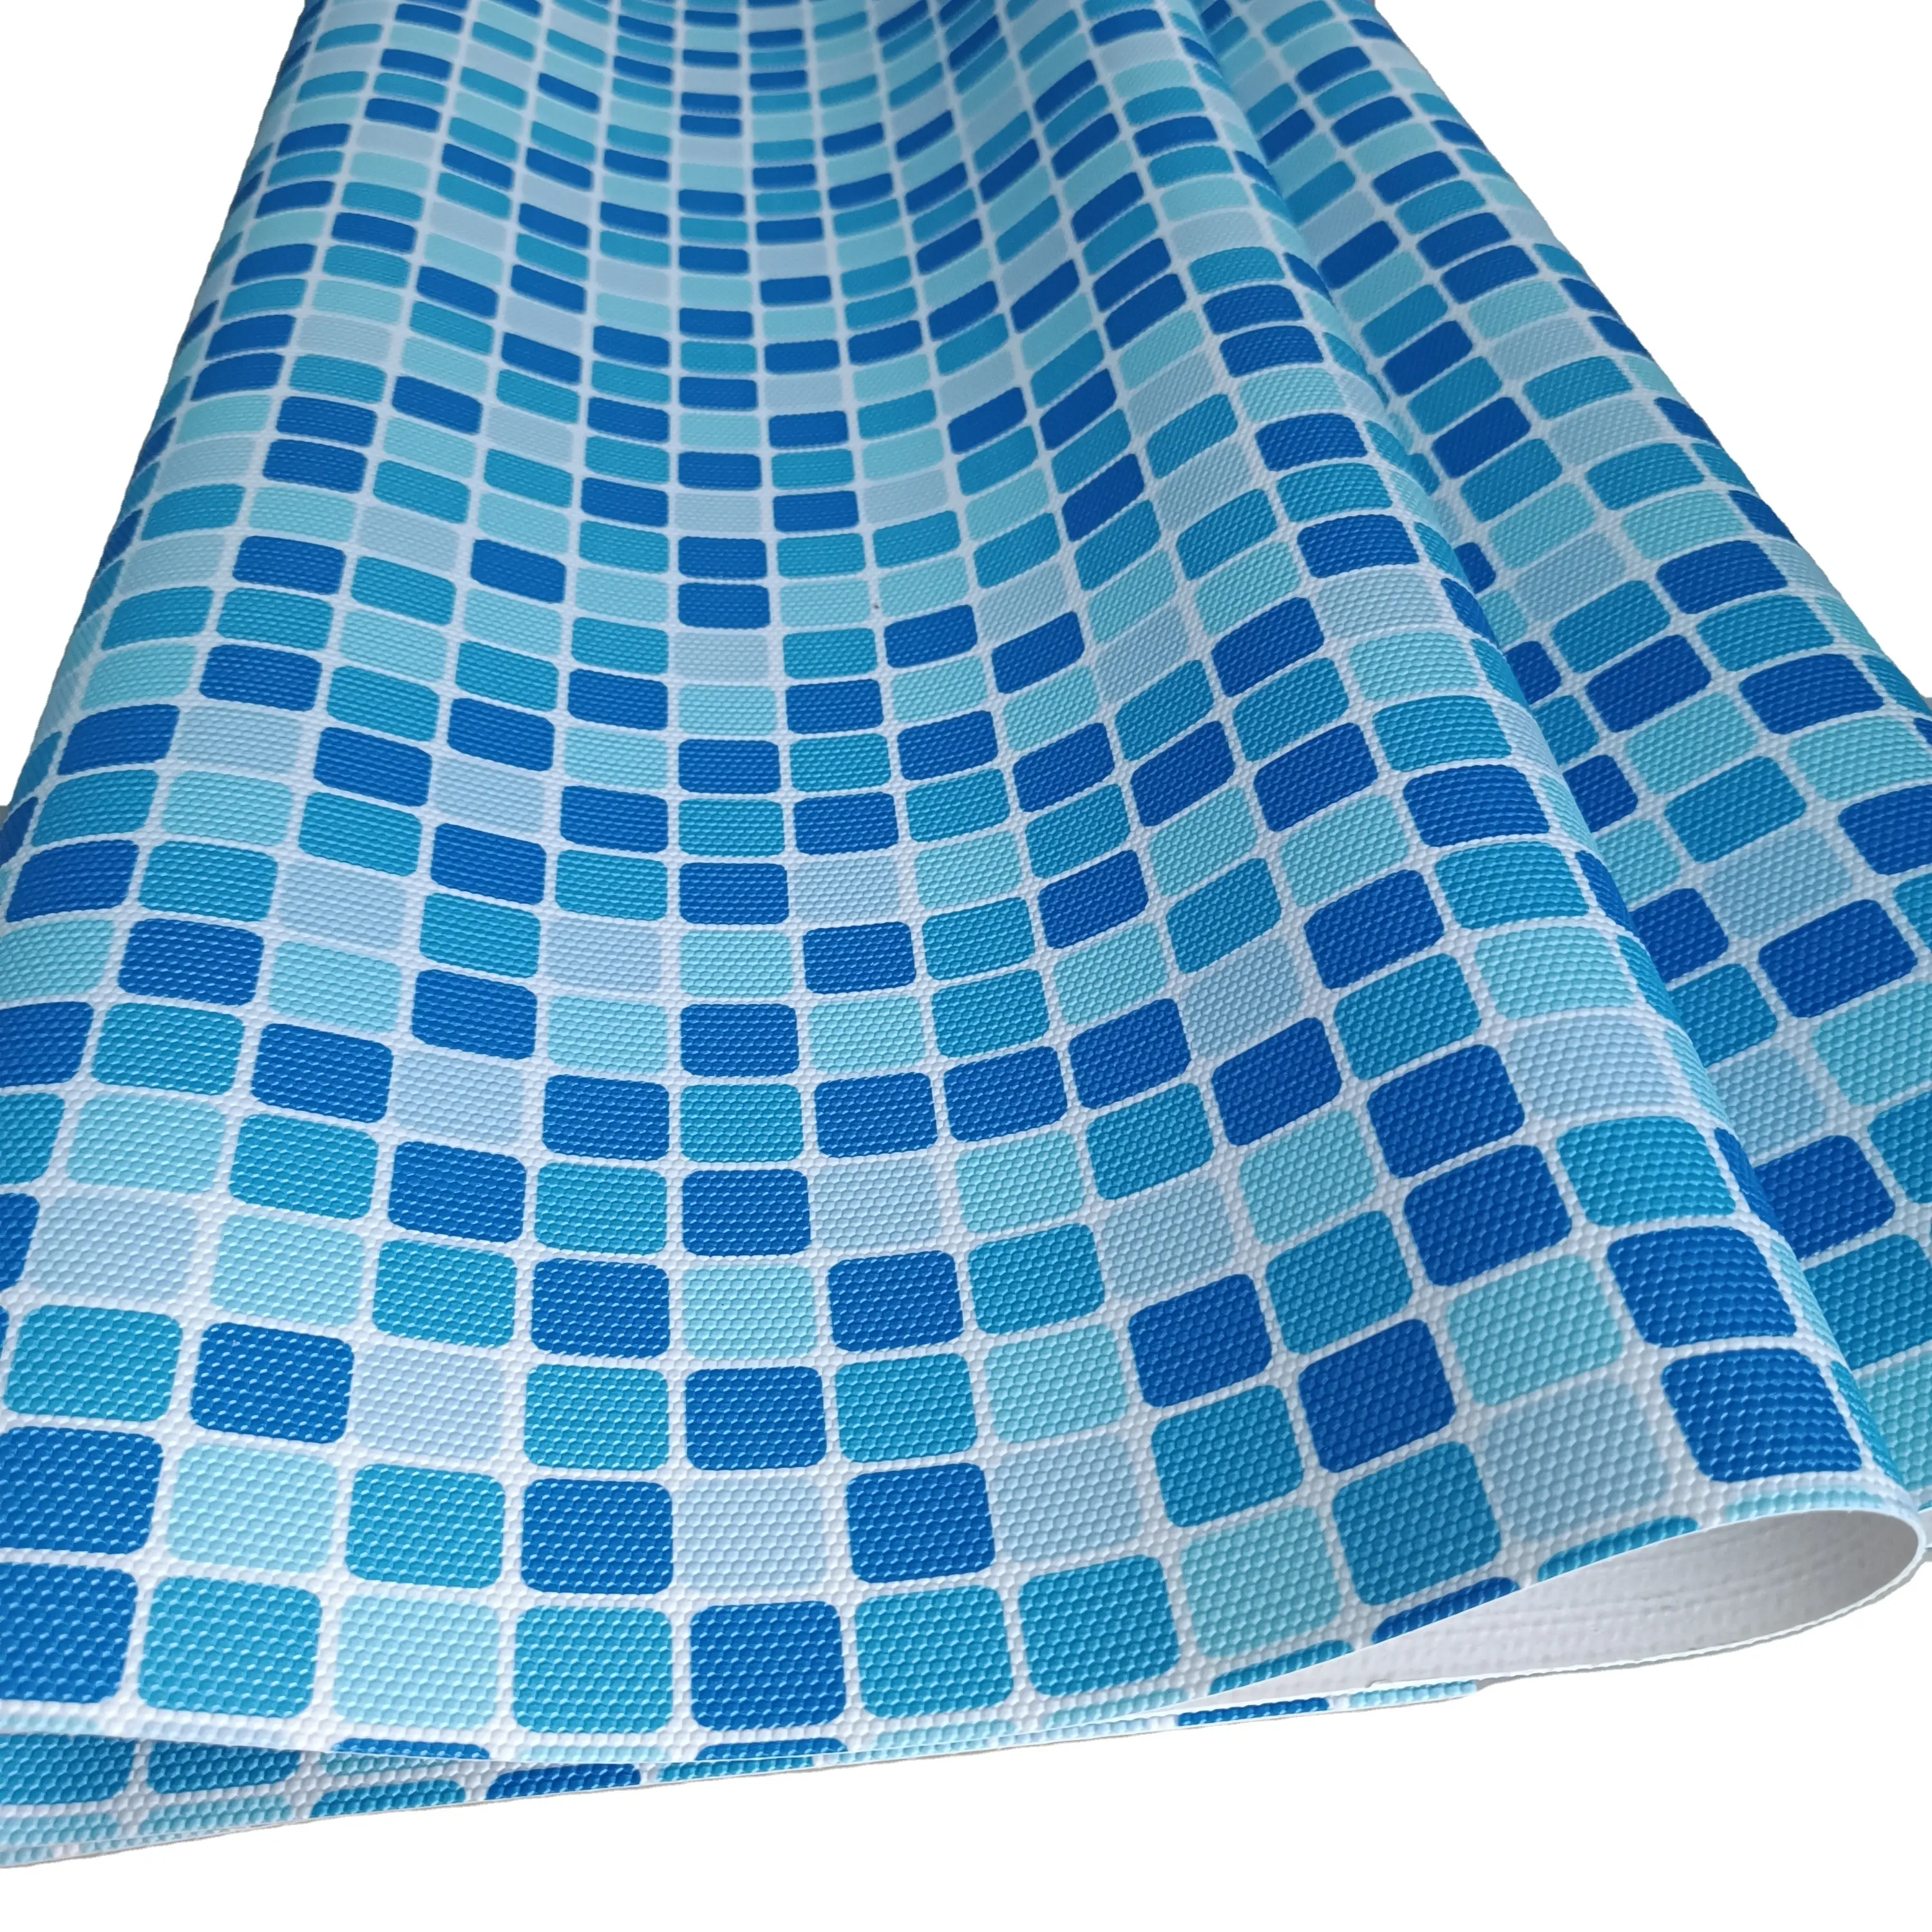 1.2mm 1.5mm non anti skidding swimming pool waterproofing material membrane PVC lining with low price